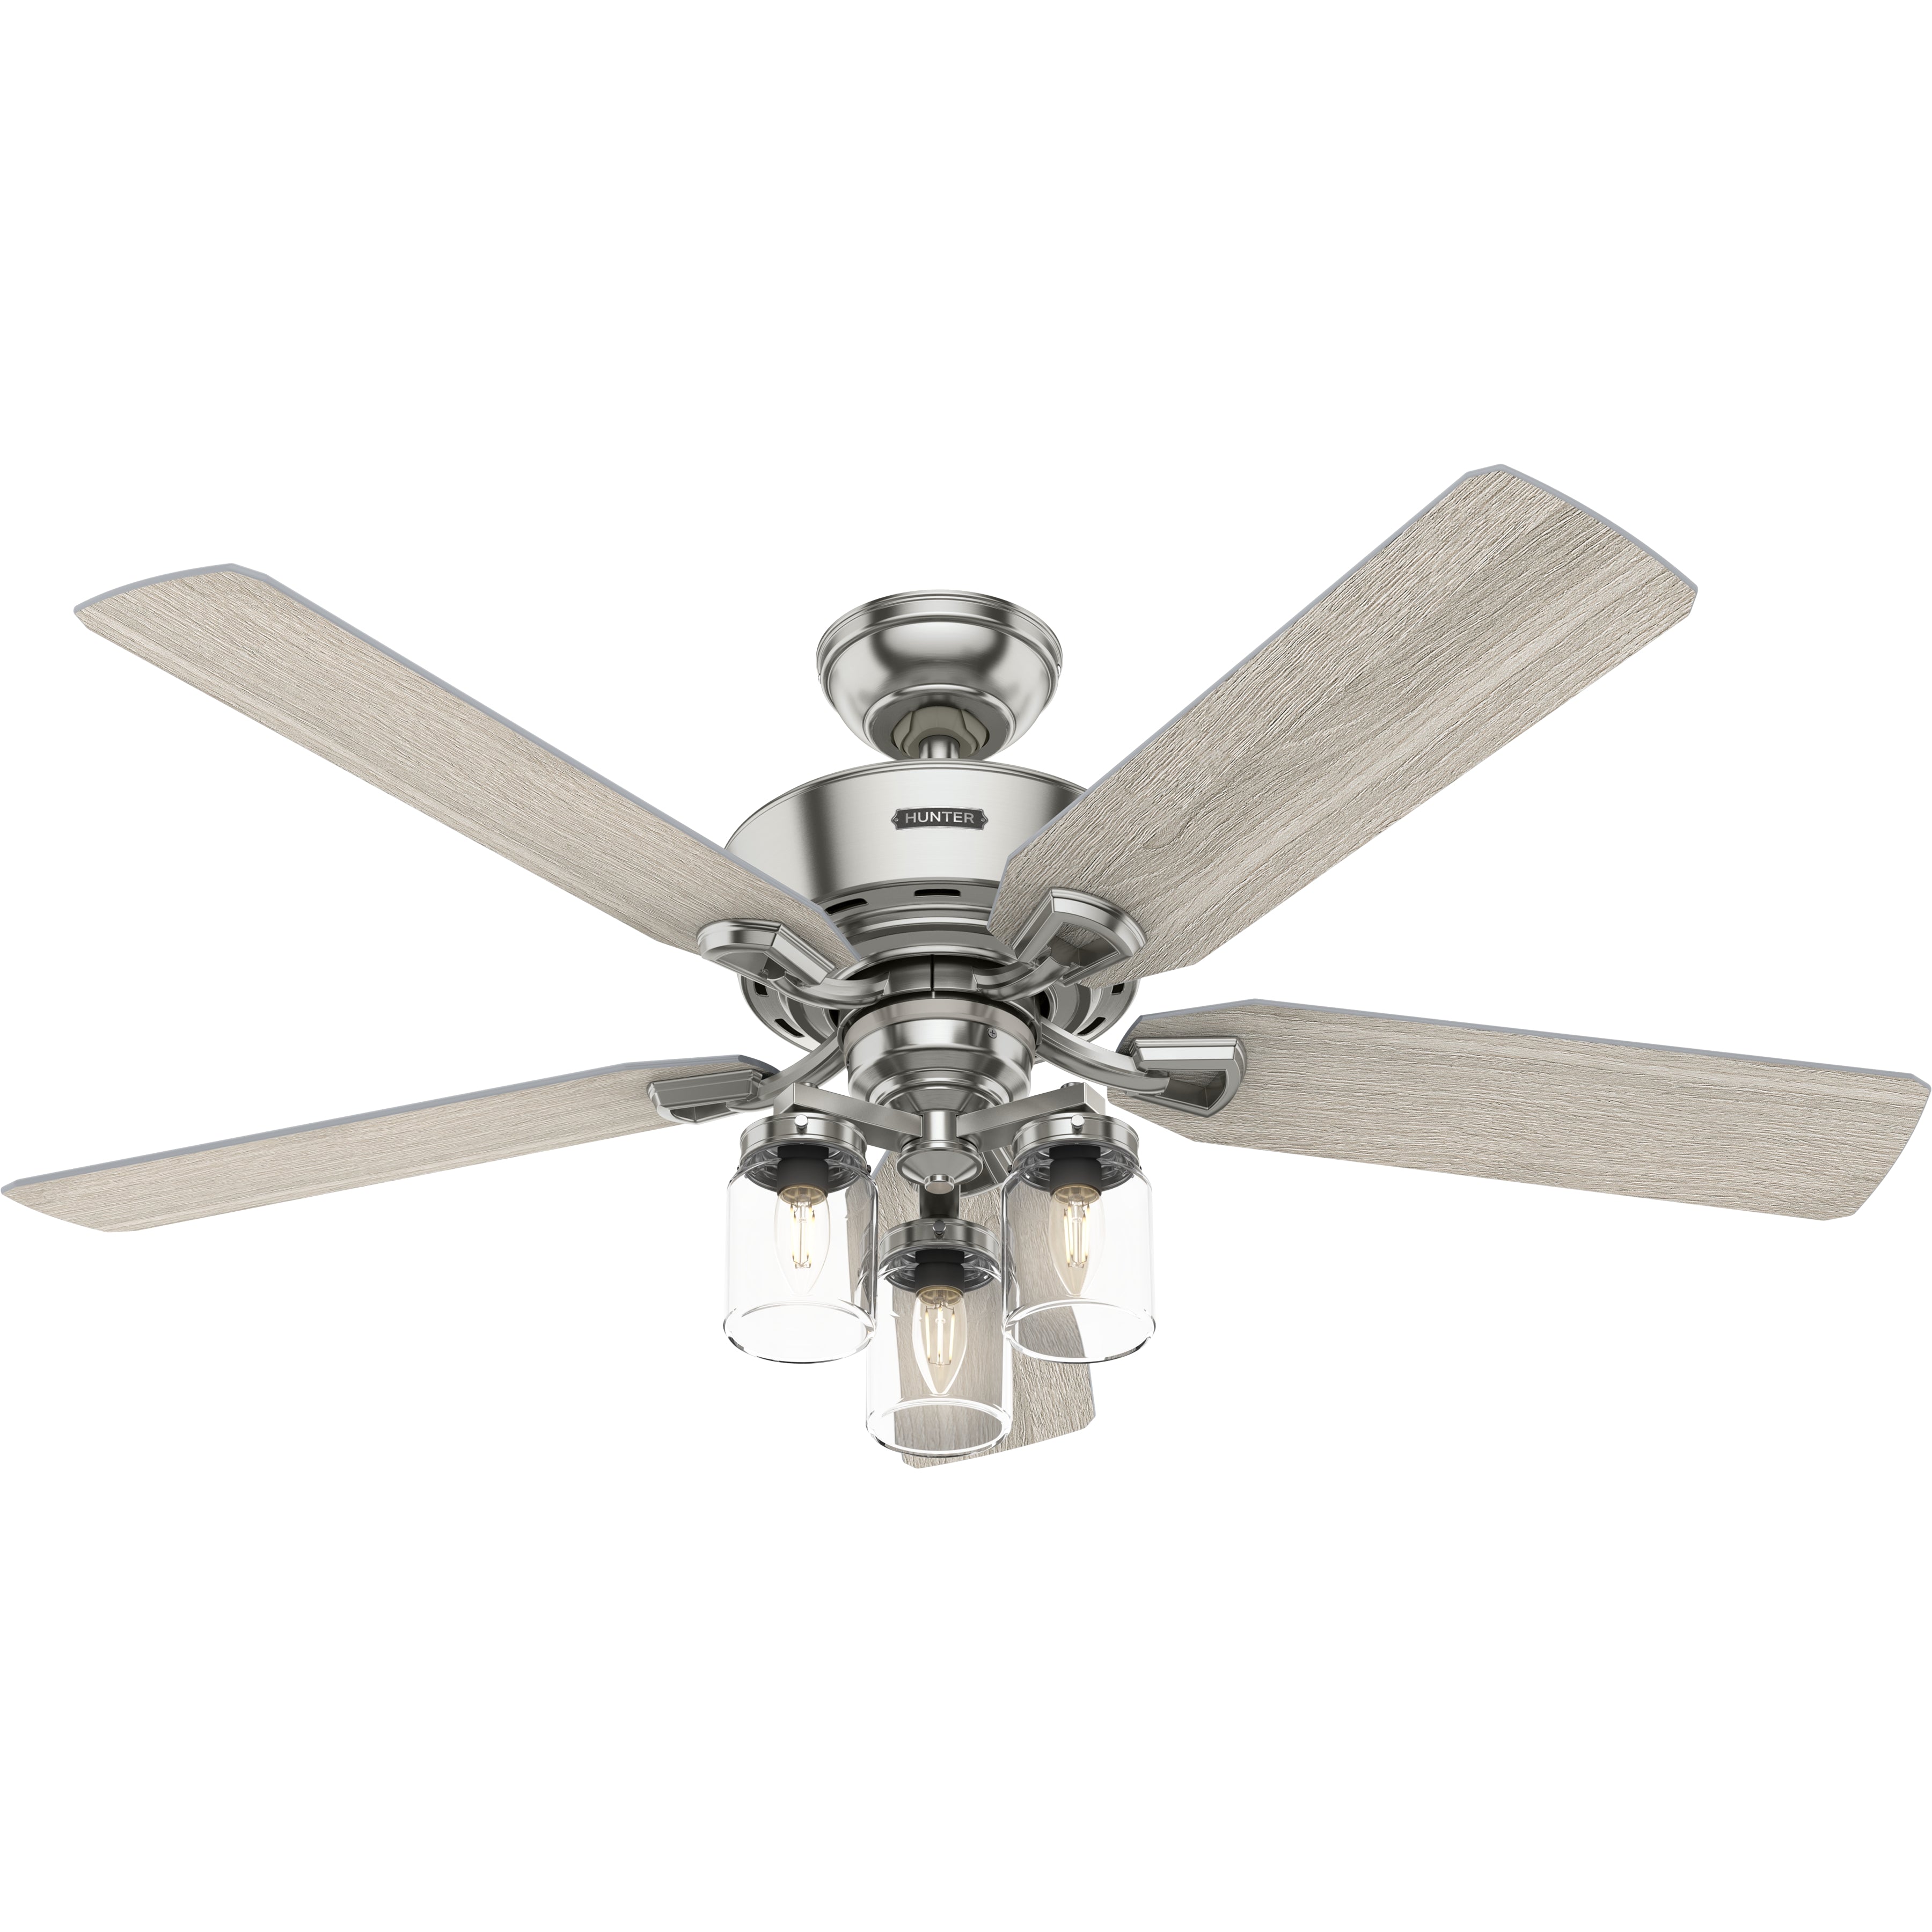 Hunter 52 inch Devon Park Ceiling Fan with LED Light Kit and Handheld Remote